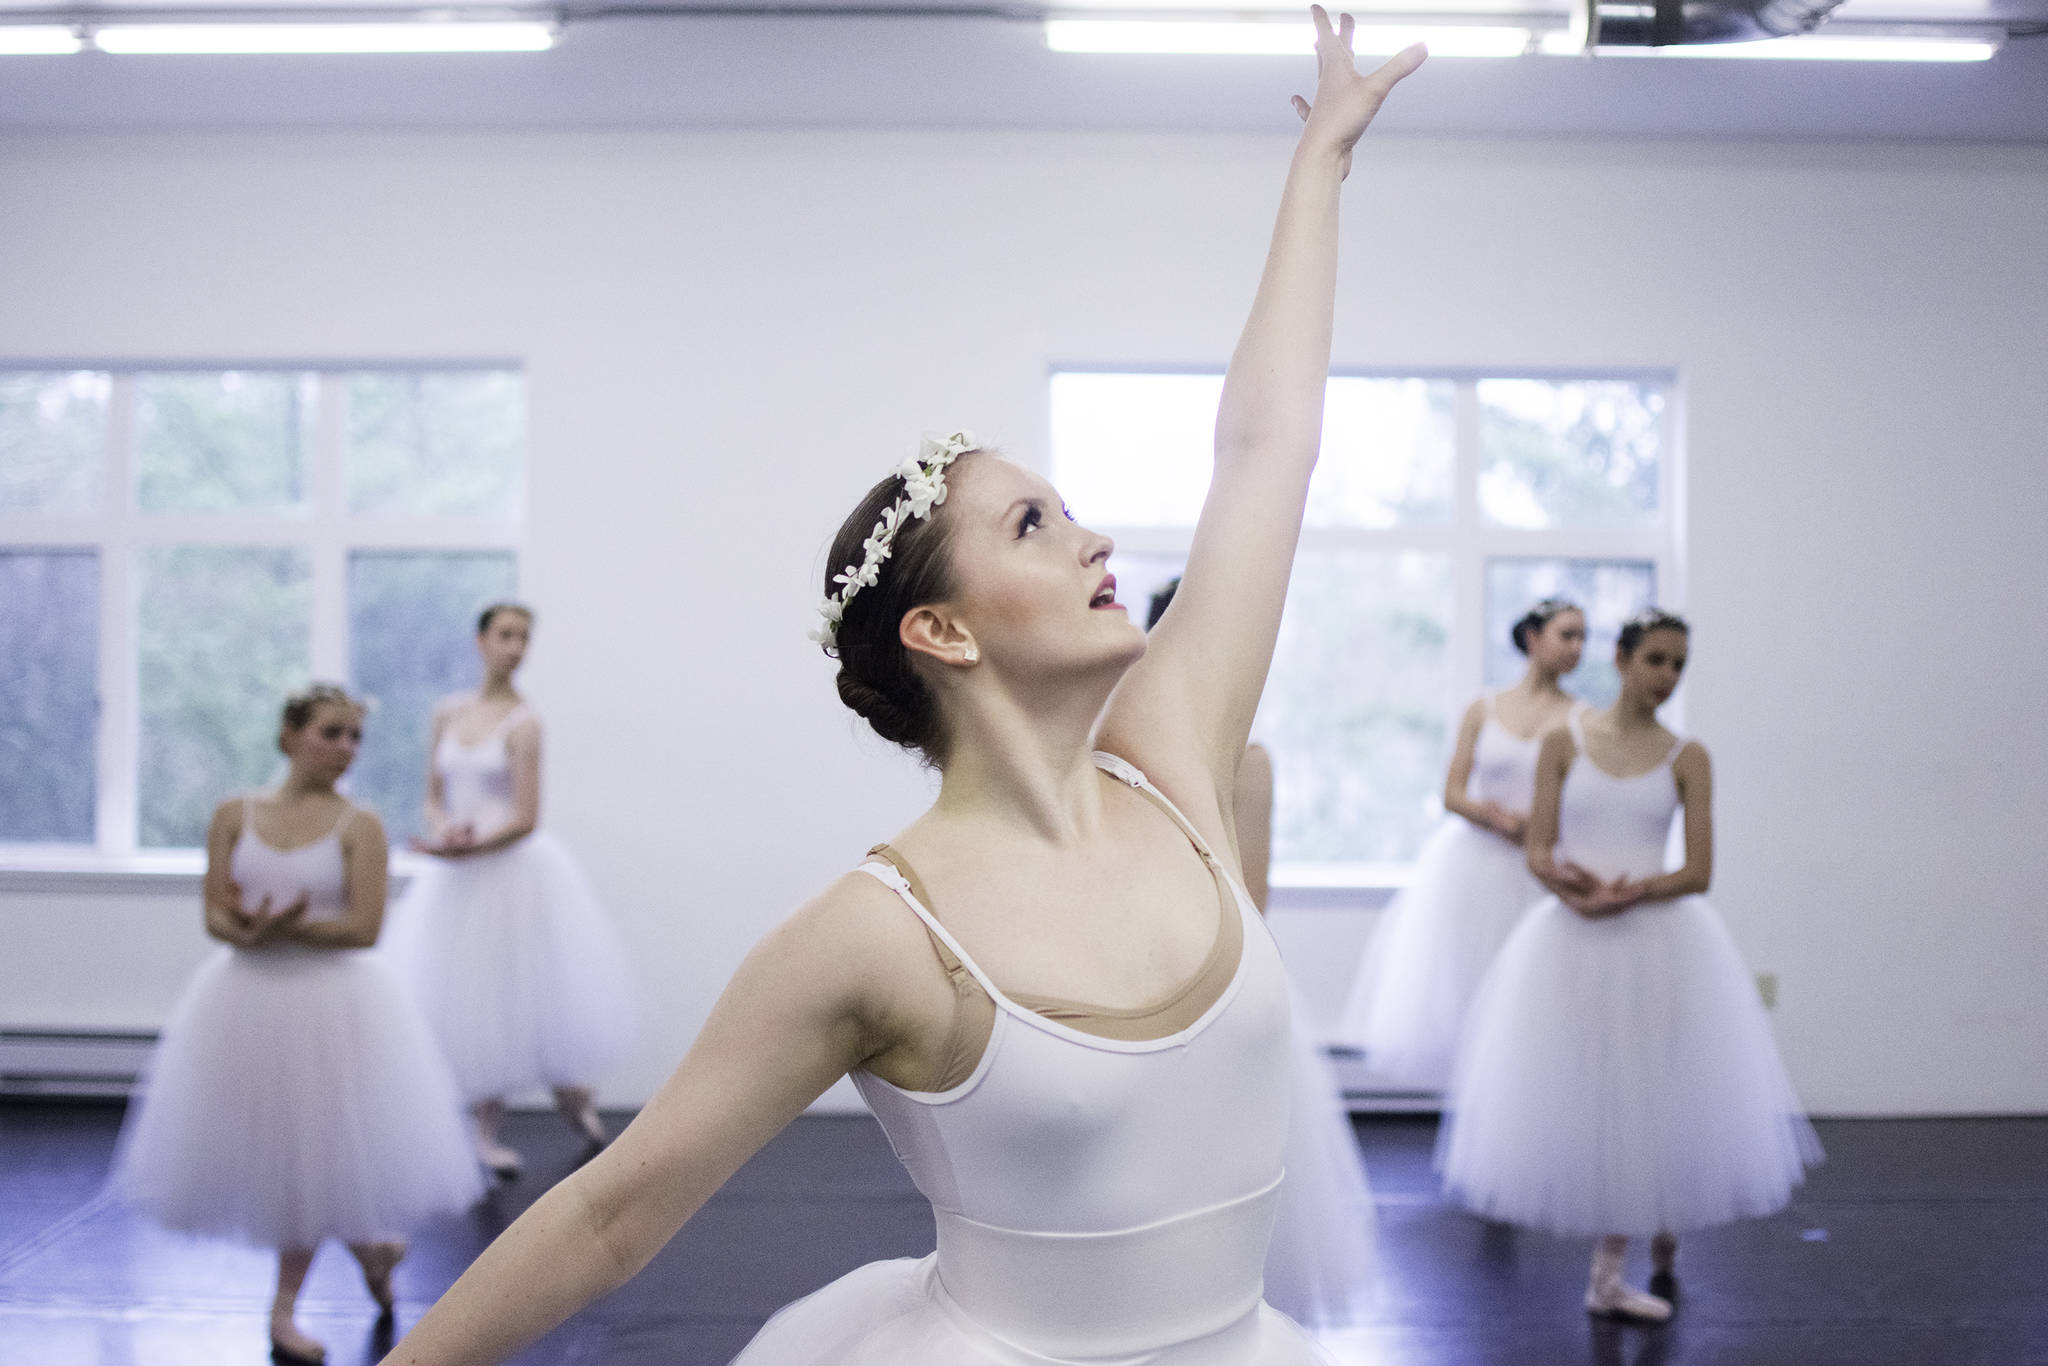 Anna McDowell dances the role of Myrtha in “Giselle” at the Juneau Dance Theatre. Richard McGrail | For the Capital City Weekly